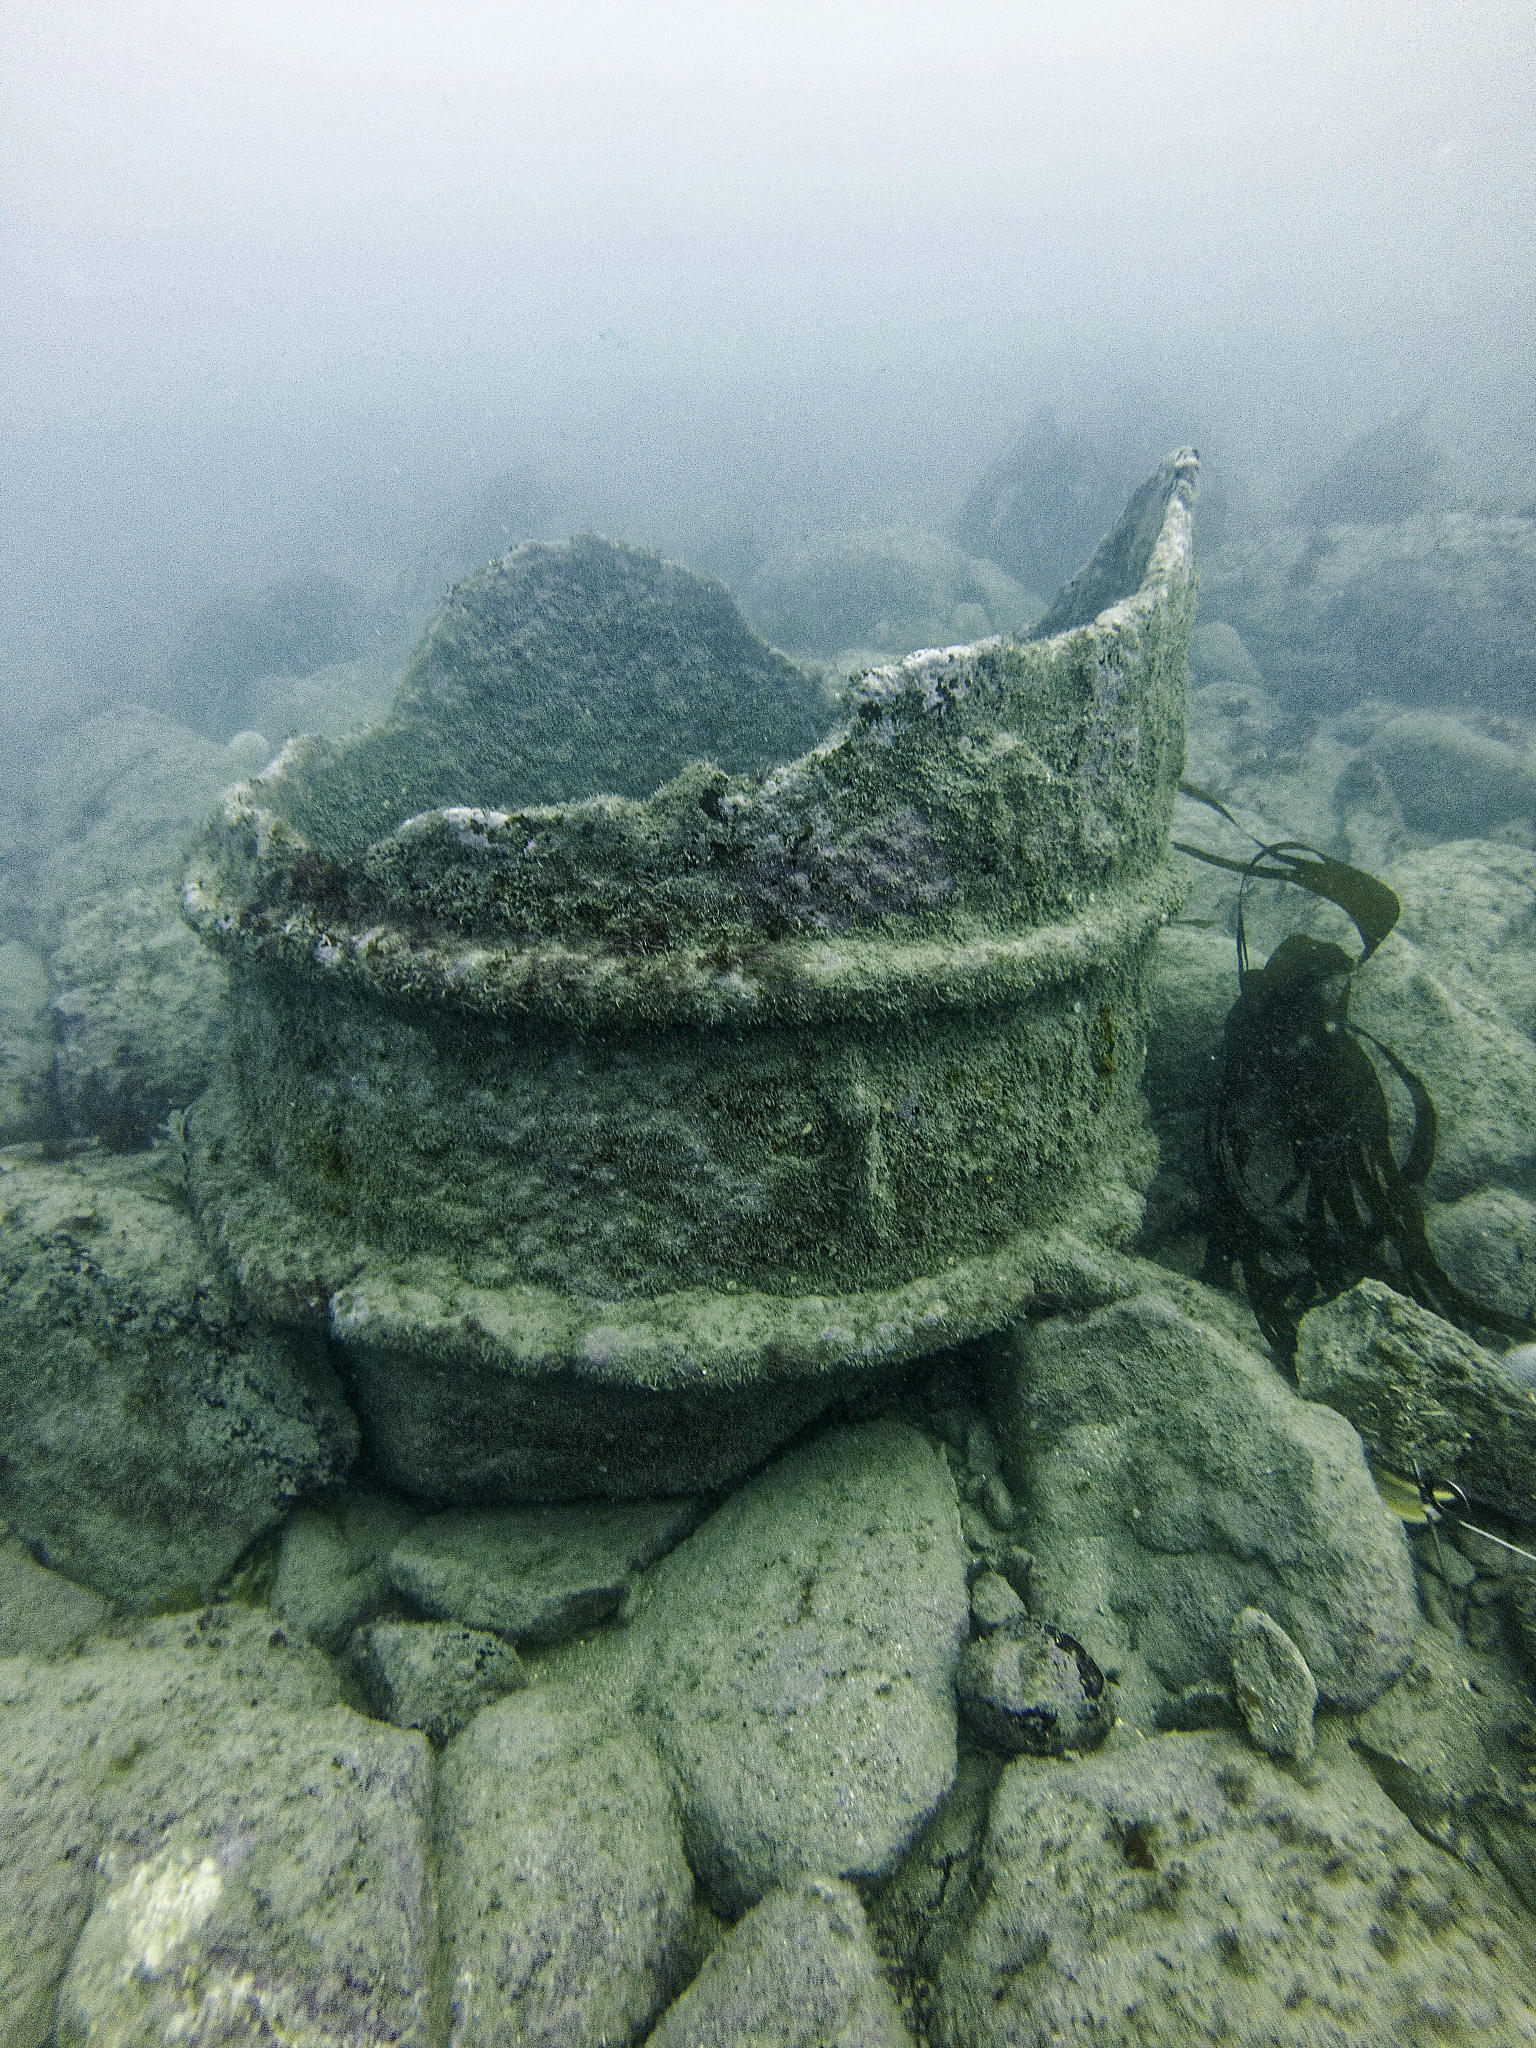 An underwater photograph of cylinder fragment C6 lying upright on the rocky seabed. The flange at the bottom and one of the reinforcing rings can be seen clearly.